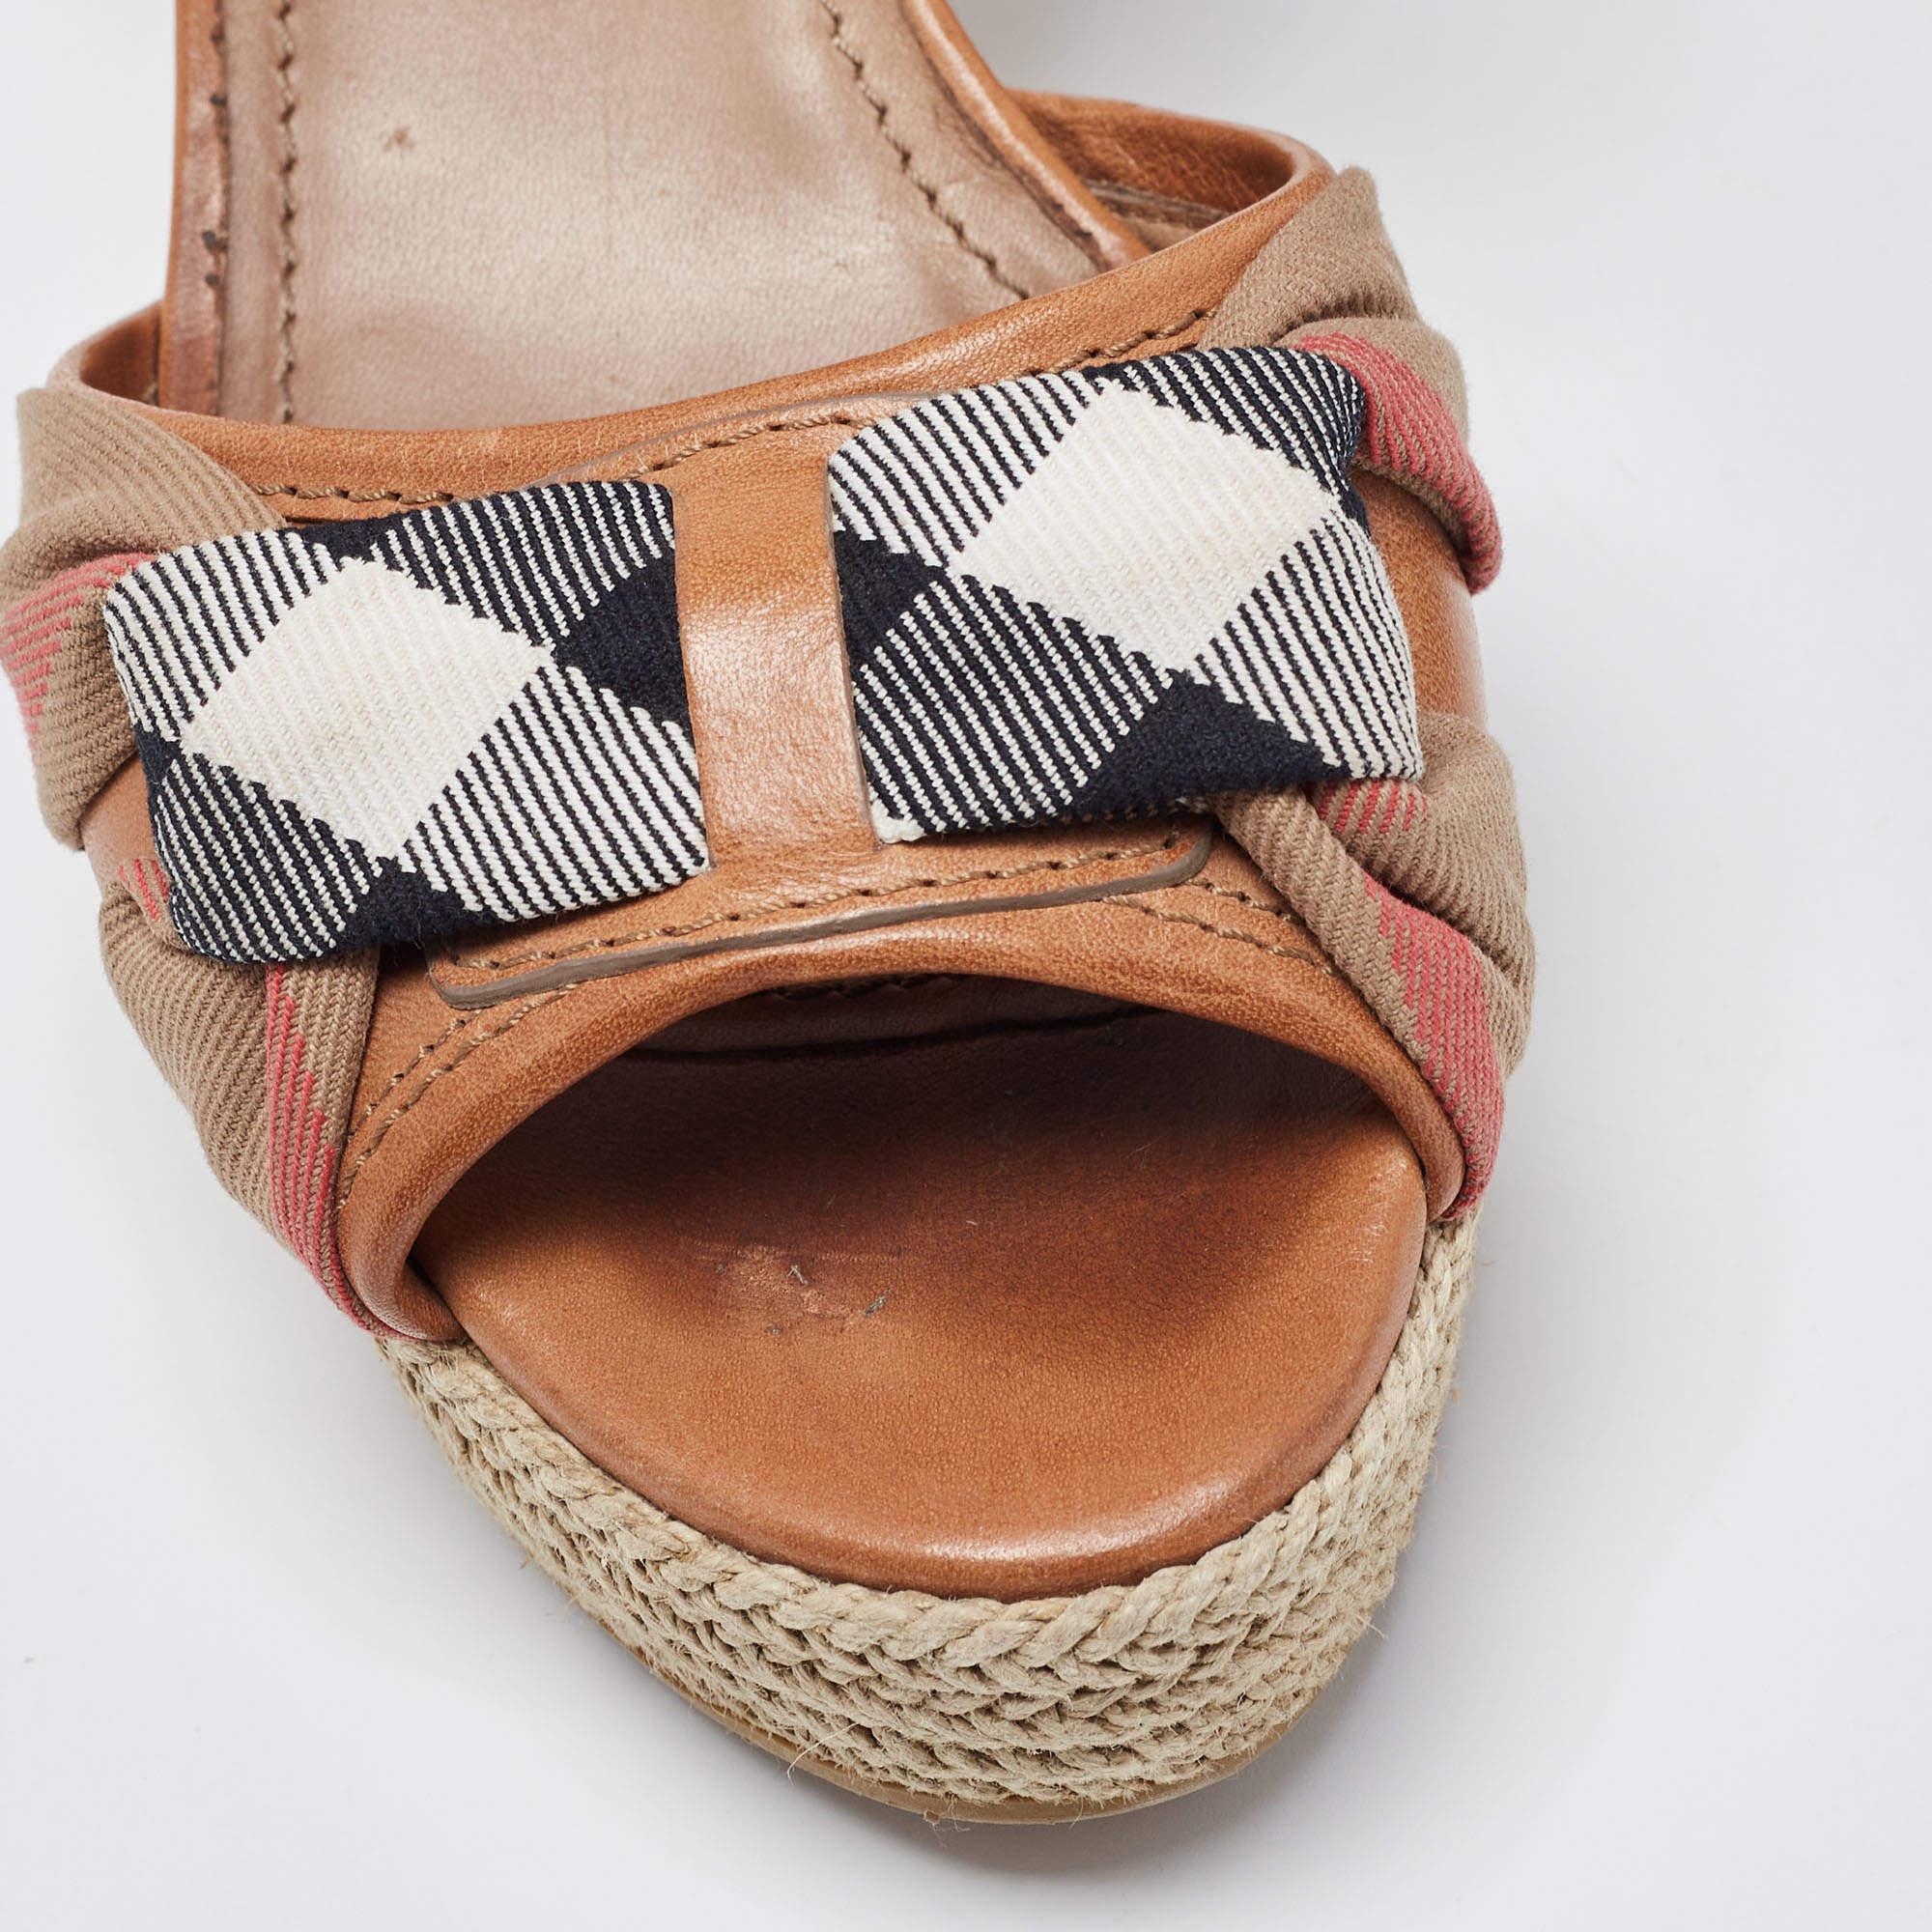 Burberry Brown Leather and Canvas Wedge Espadrilles Ankle Wrap Sandals Size 39.5 For Sale 4